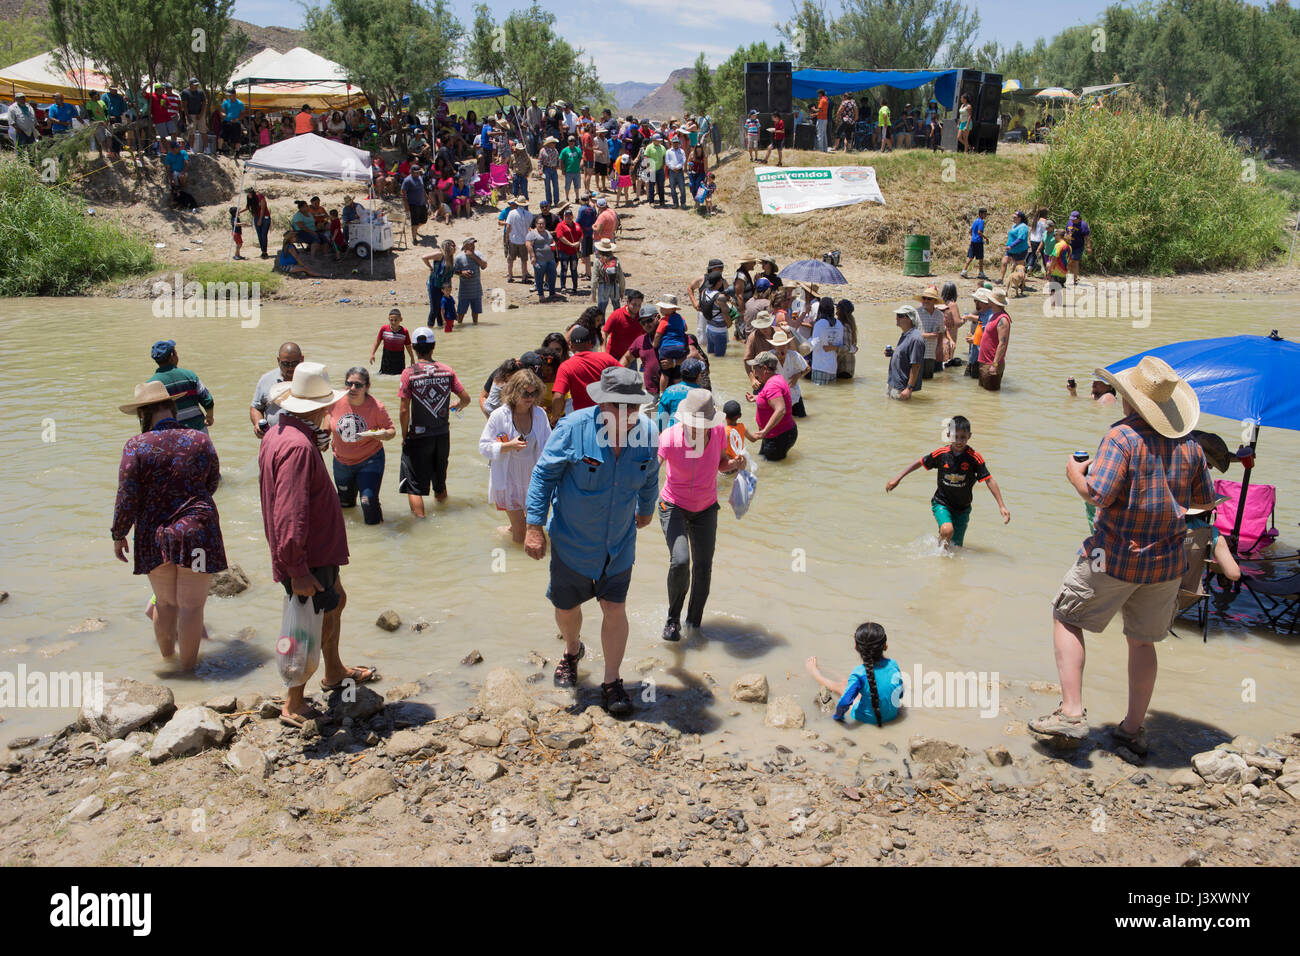 Fiesta Protesta participants, an annual demonstration again the closing of part of the US-Mexican border, gather in the Rio Grande in Lajitas, Texas. Stock Photo